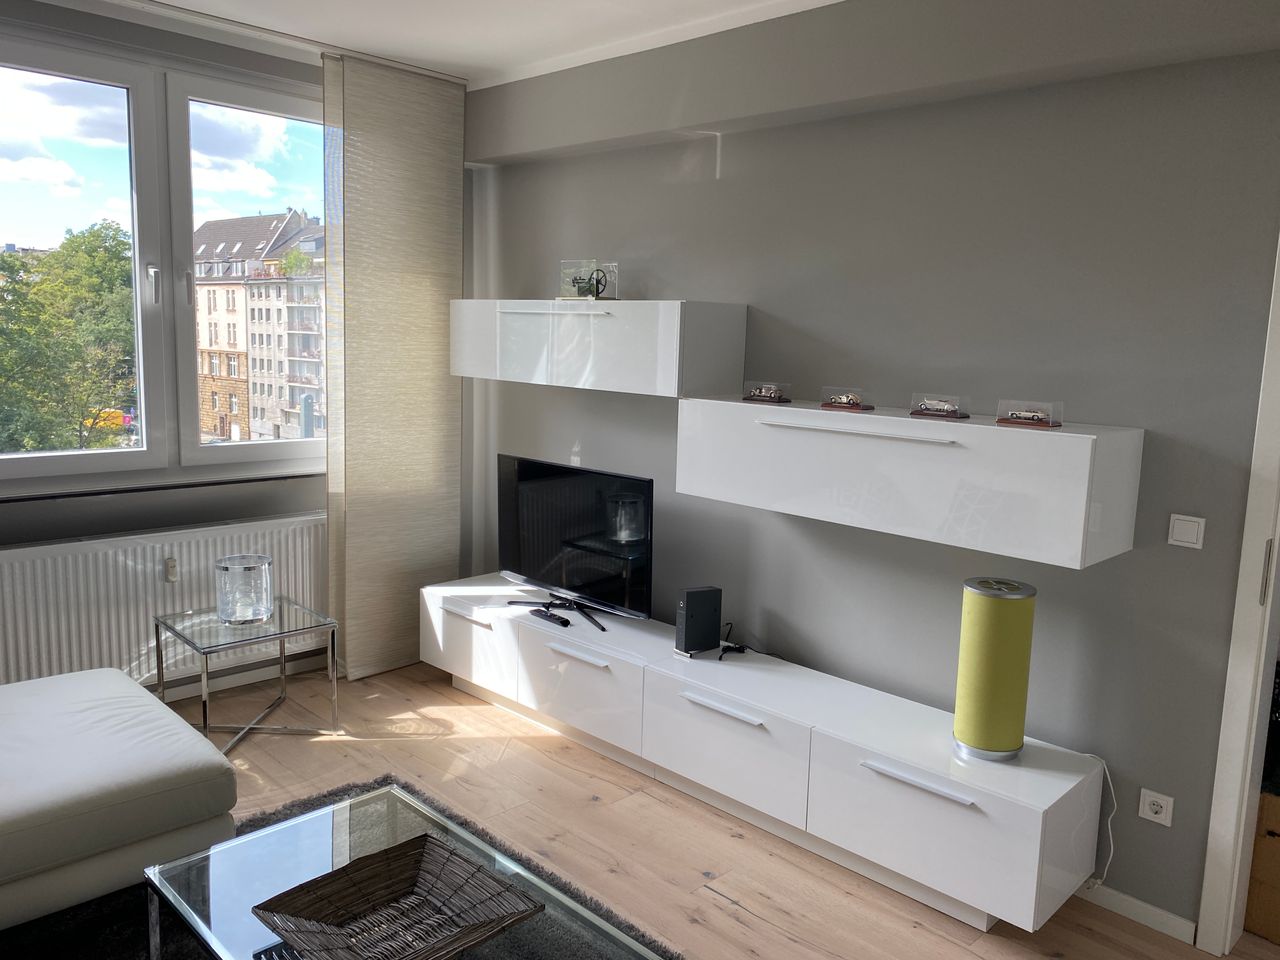 All new: refurbished, modern furnished, bright 3-room flat directly at the Zoopark